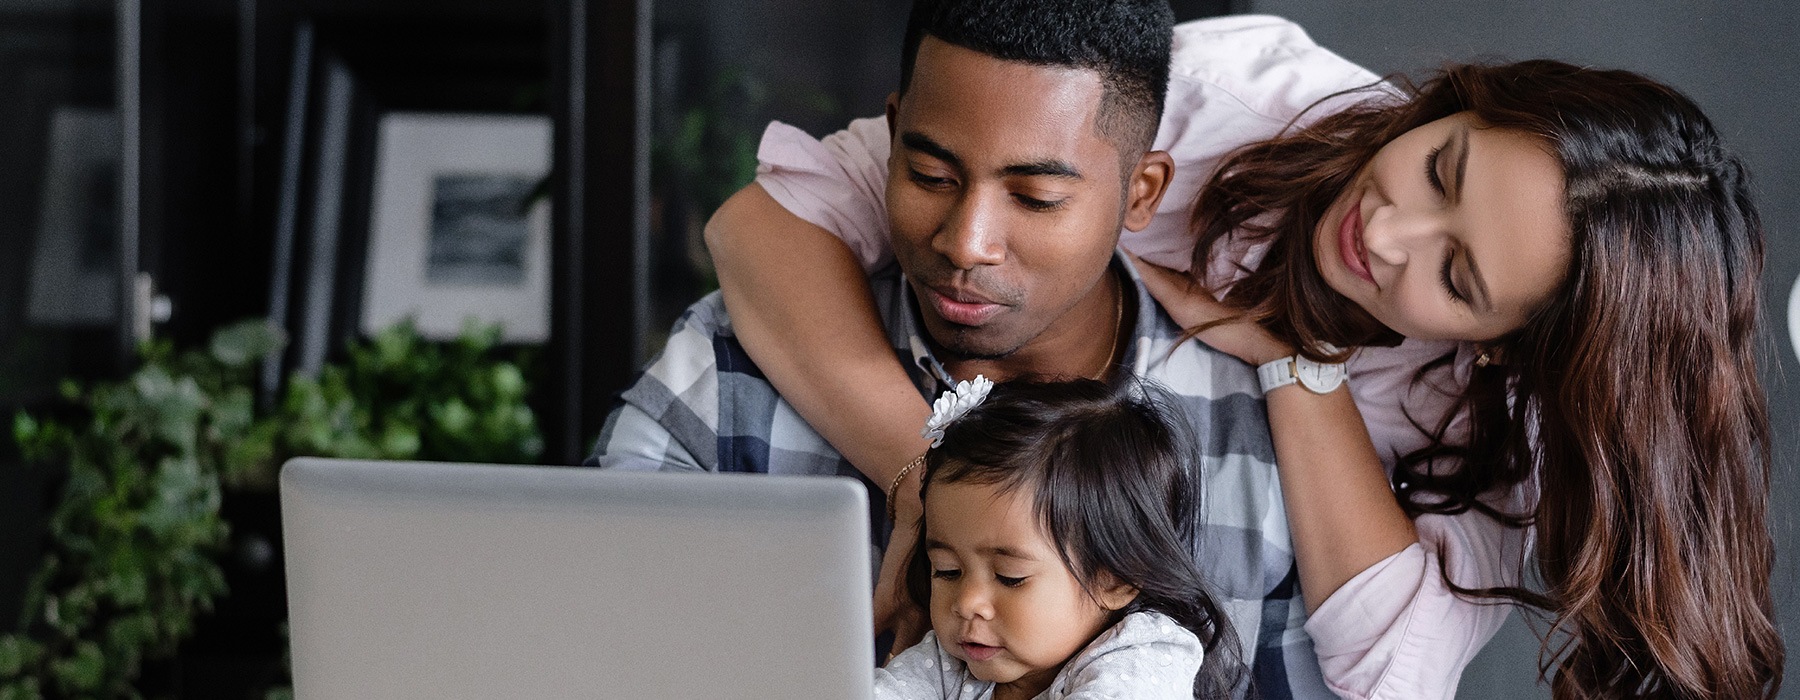 lifestyle image of a couple and child looking at a laptop together